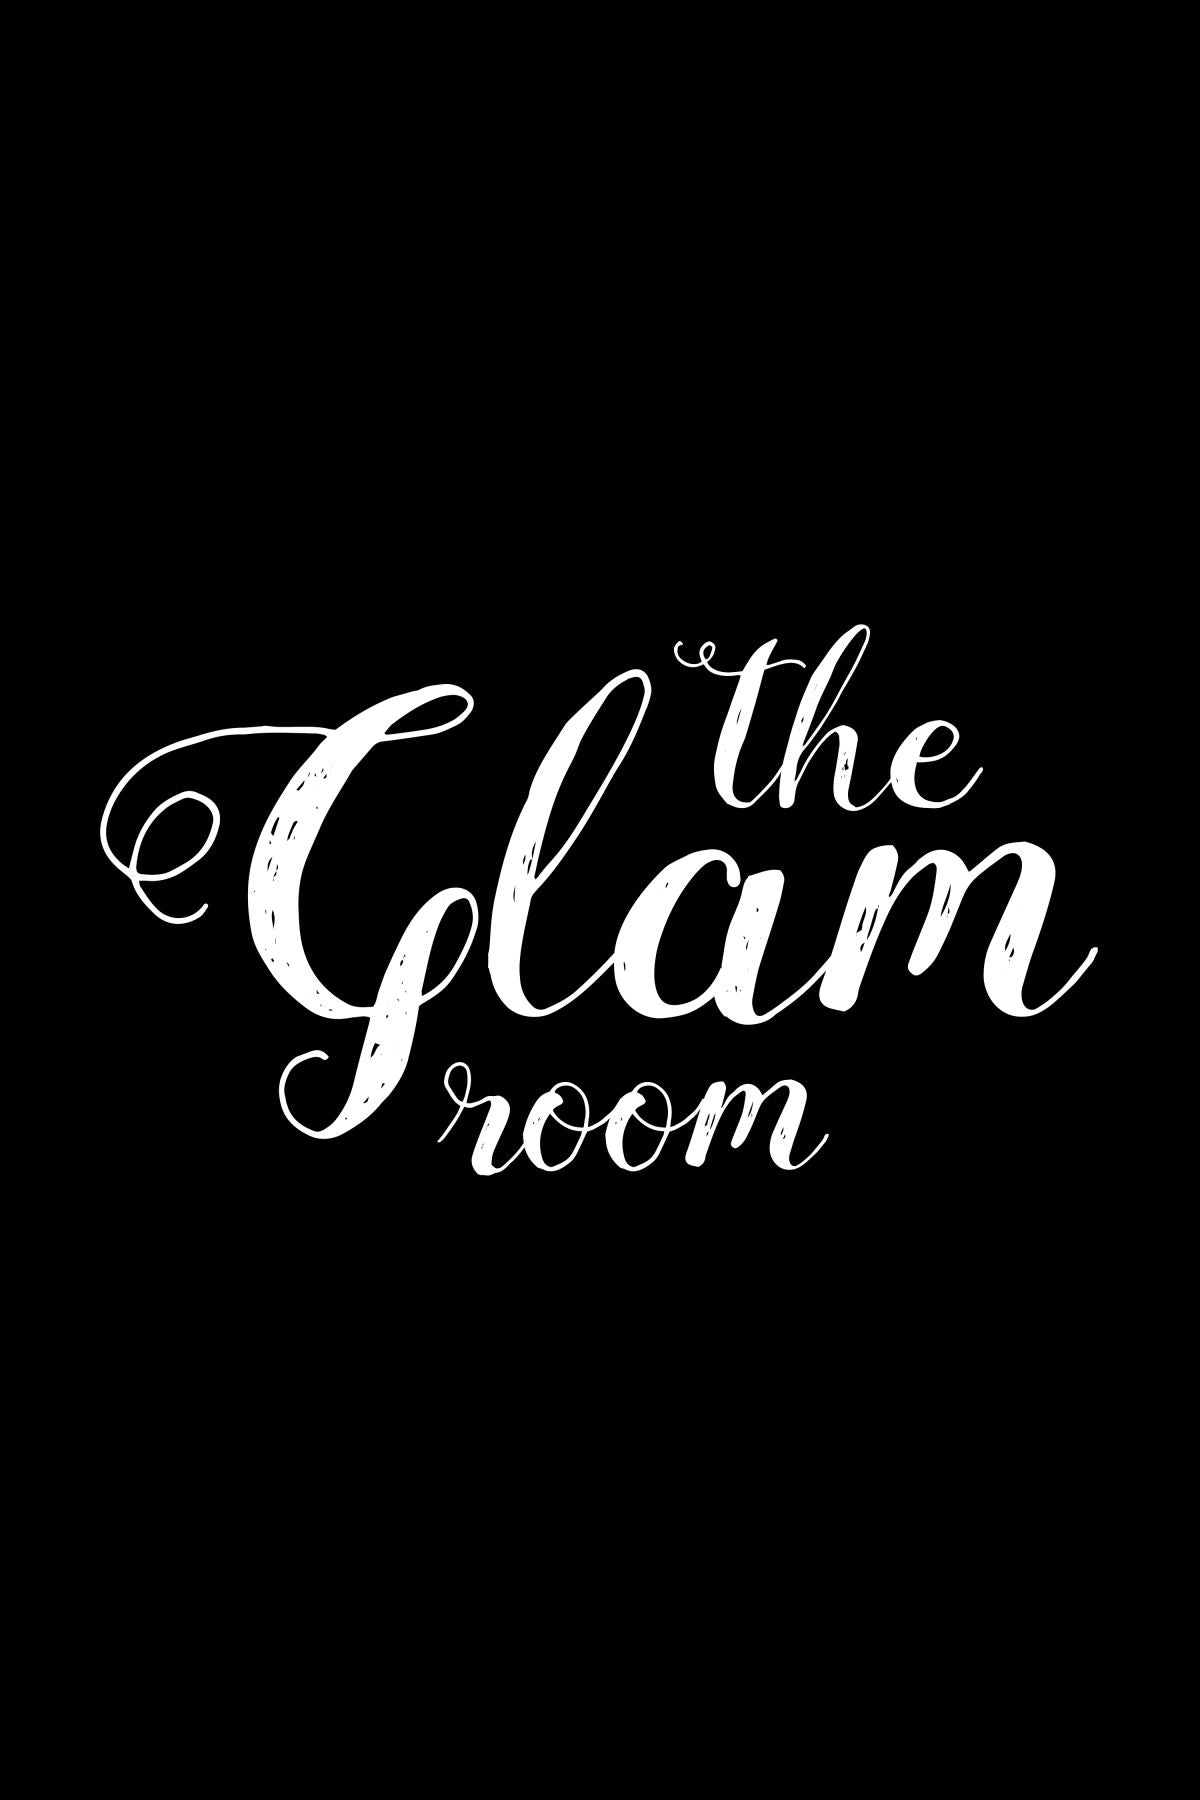 The Glam Room